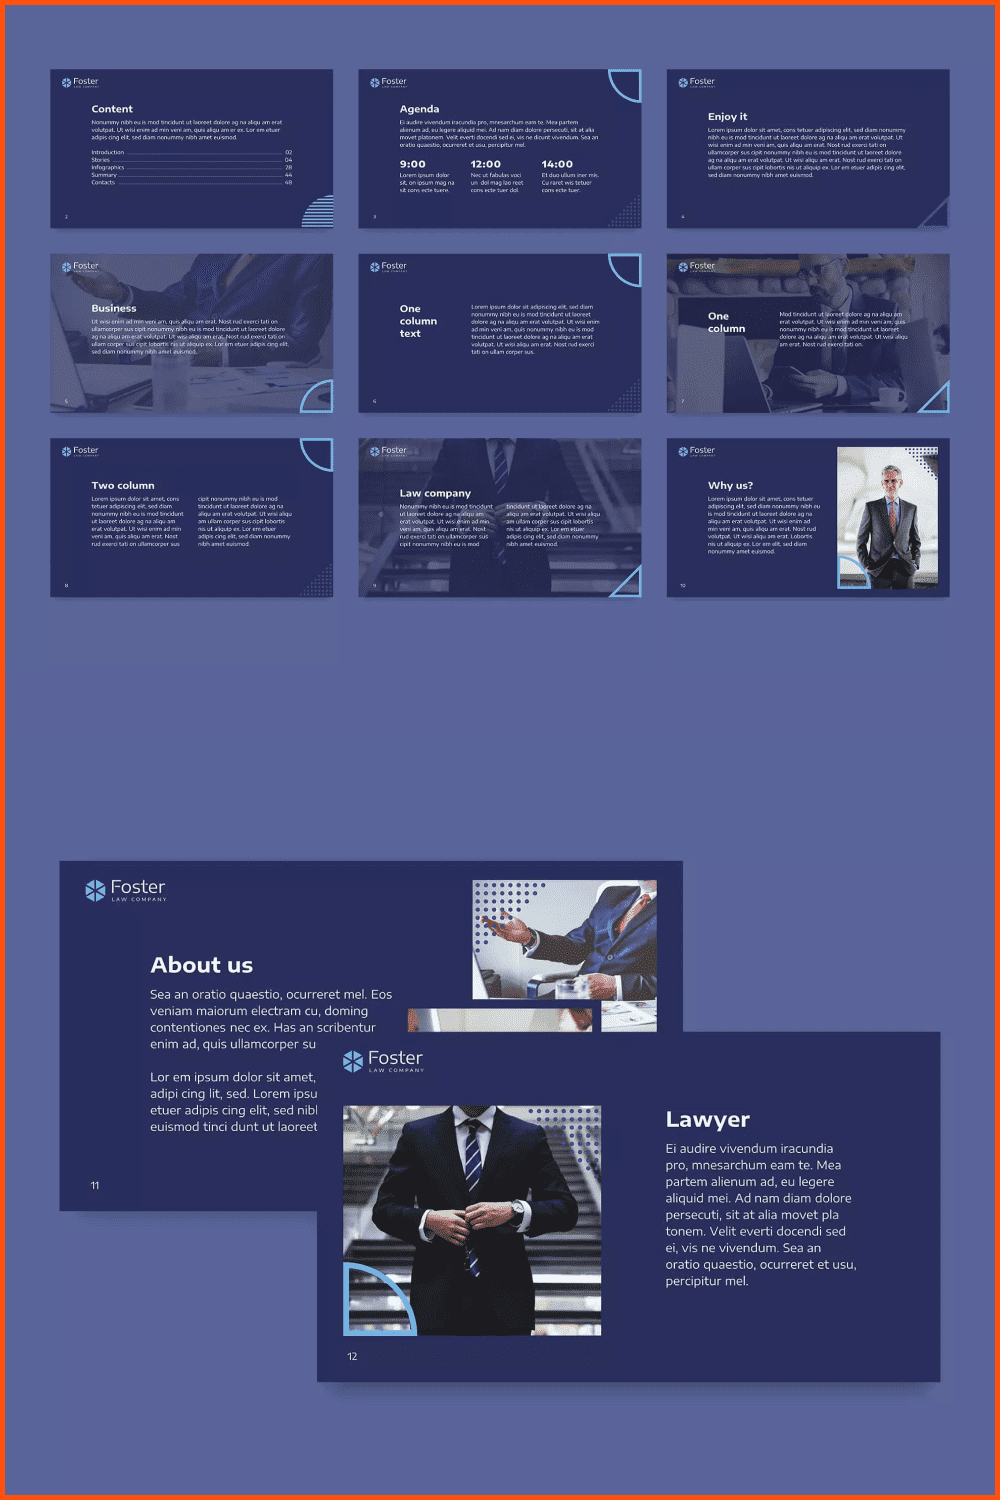 Law Company PowerPoint Presentation Template.